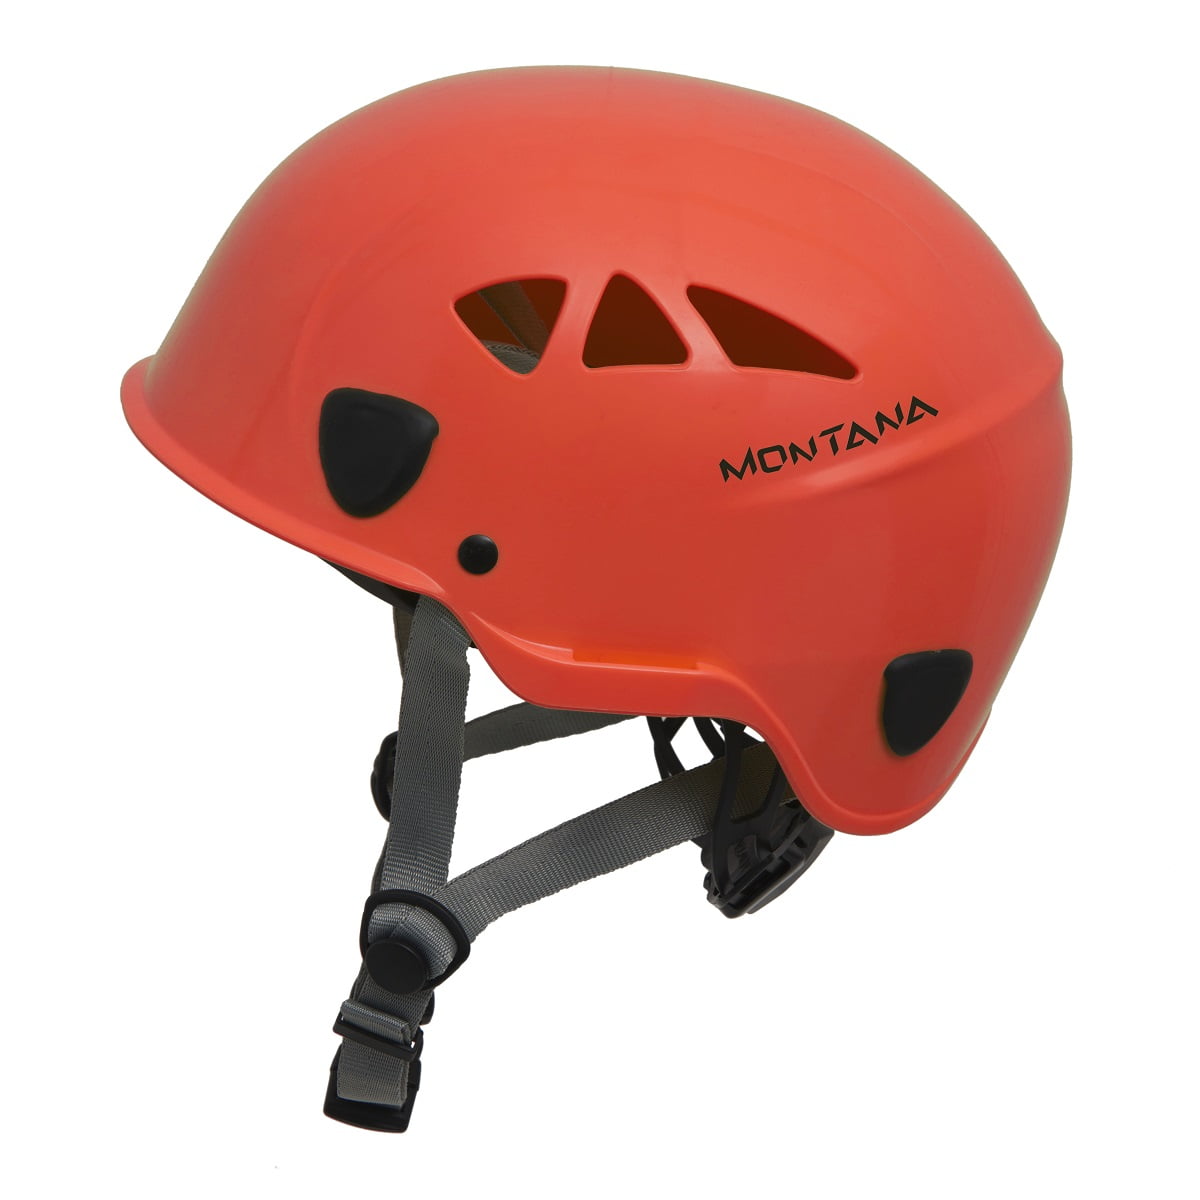 Capacete Ares ABS Vermelho - Classe A, TIPO III, CA 32260 (Uso geral)